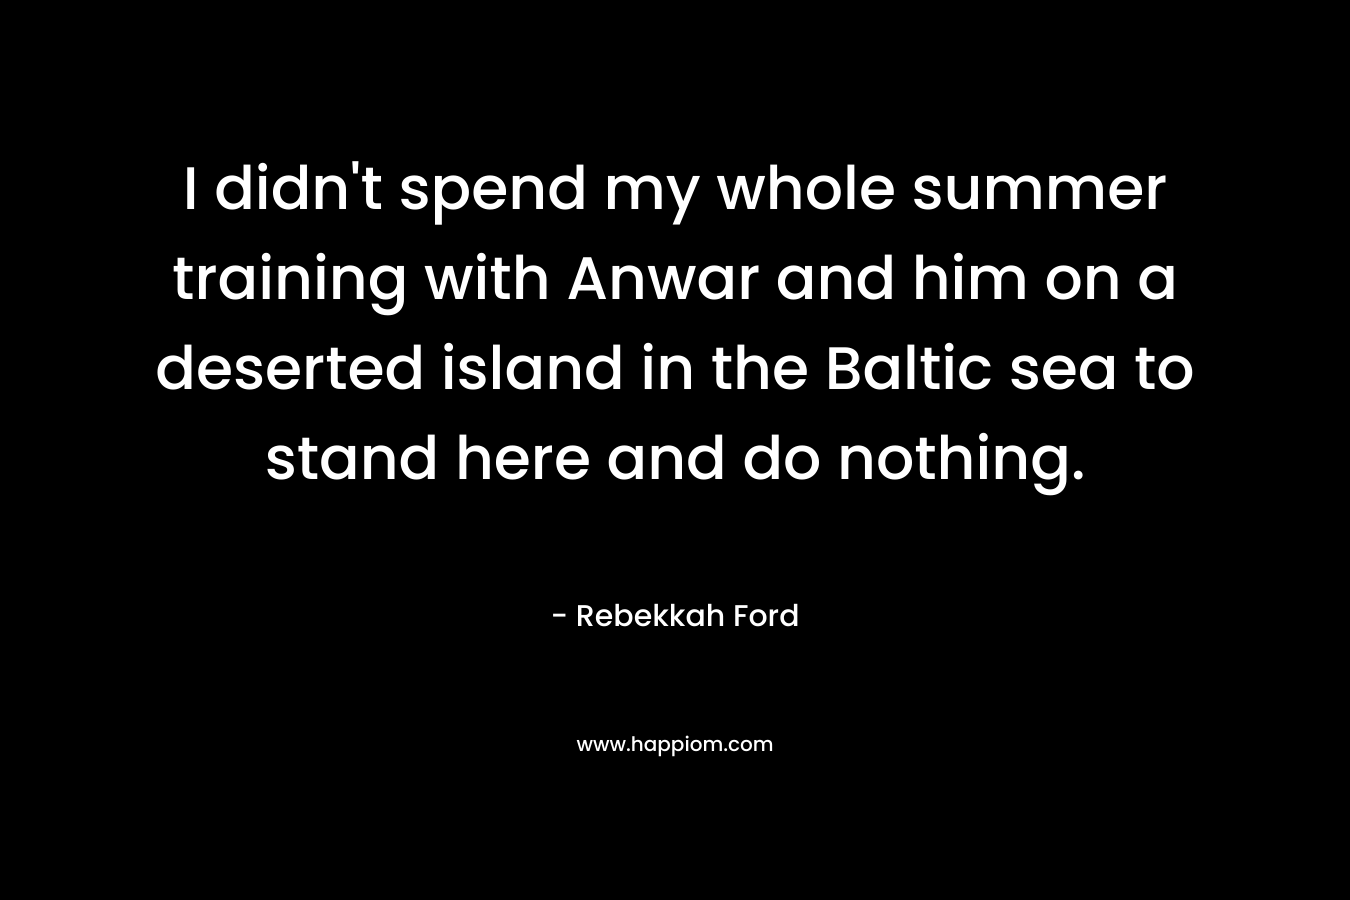 I didn’t spend my whole summer training with Anwar and him on a deserted island in the Baltic sea to stand here and do nothing. – Rebekkah Ford